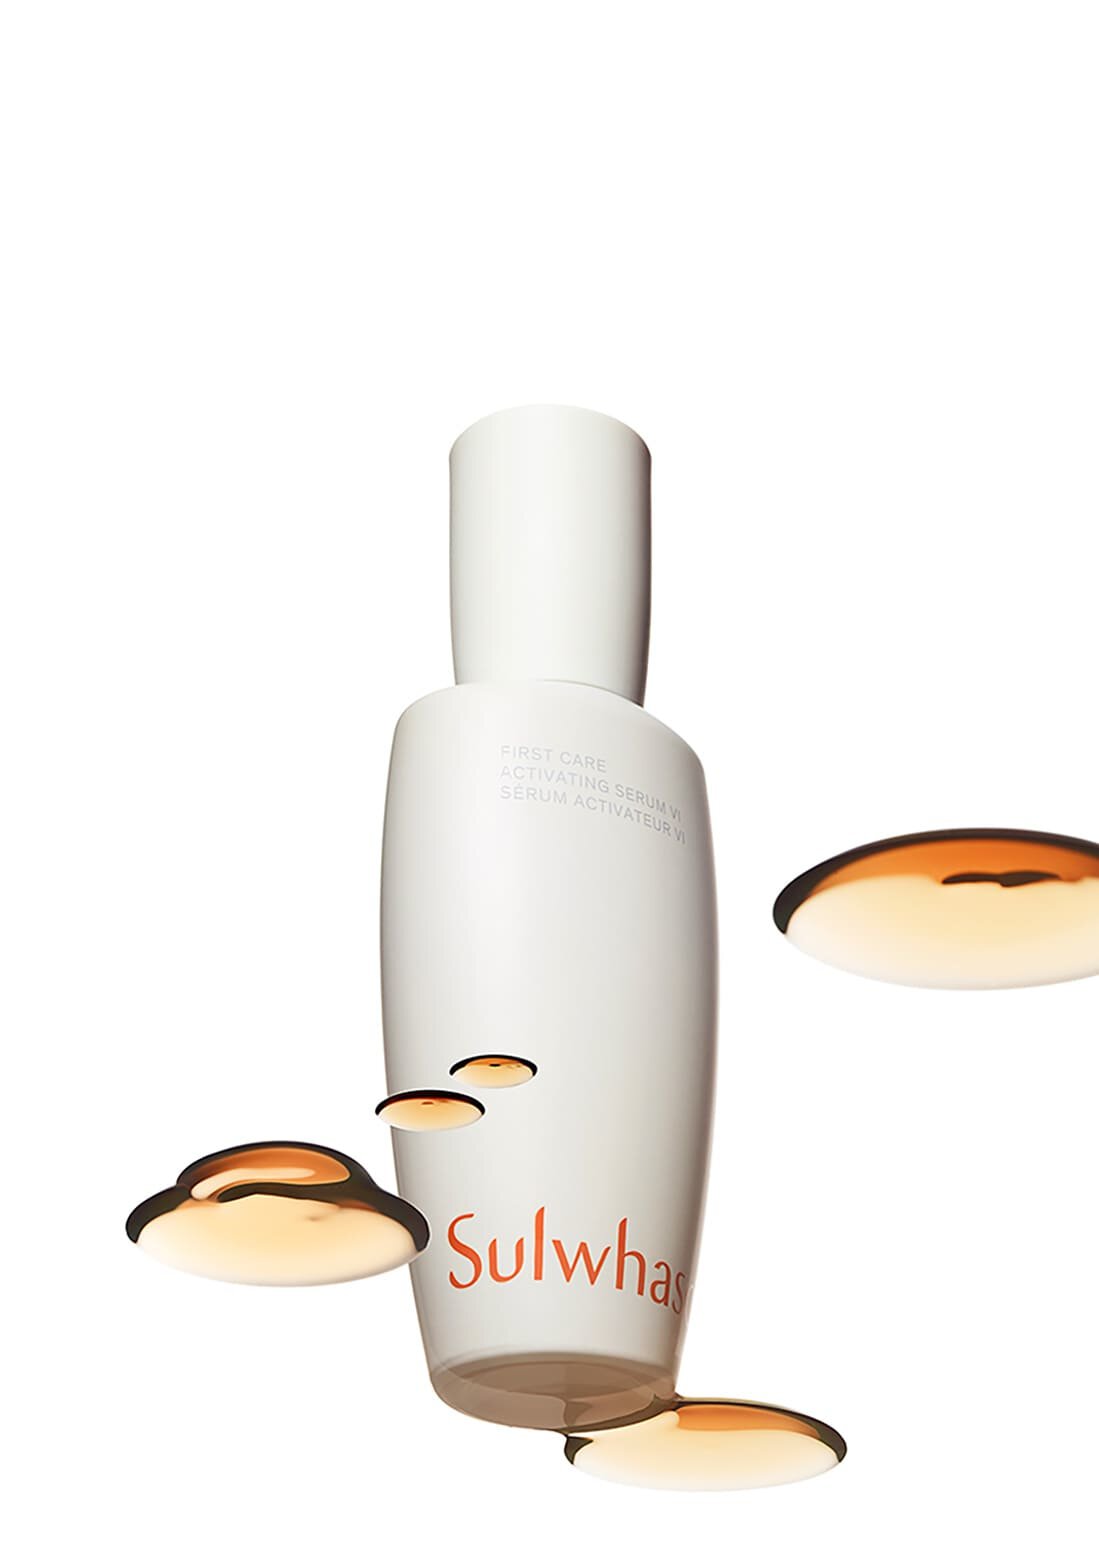 Sulwhasoo First Care Activating Serum is the first Sulwhasoo’s face serum. When used after cleansing your face, it helps bring regeneration  to your skin and better accept subsequently applied skincare items